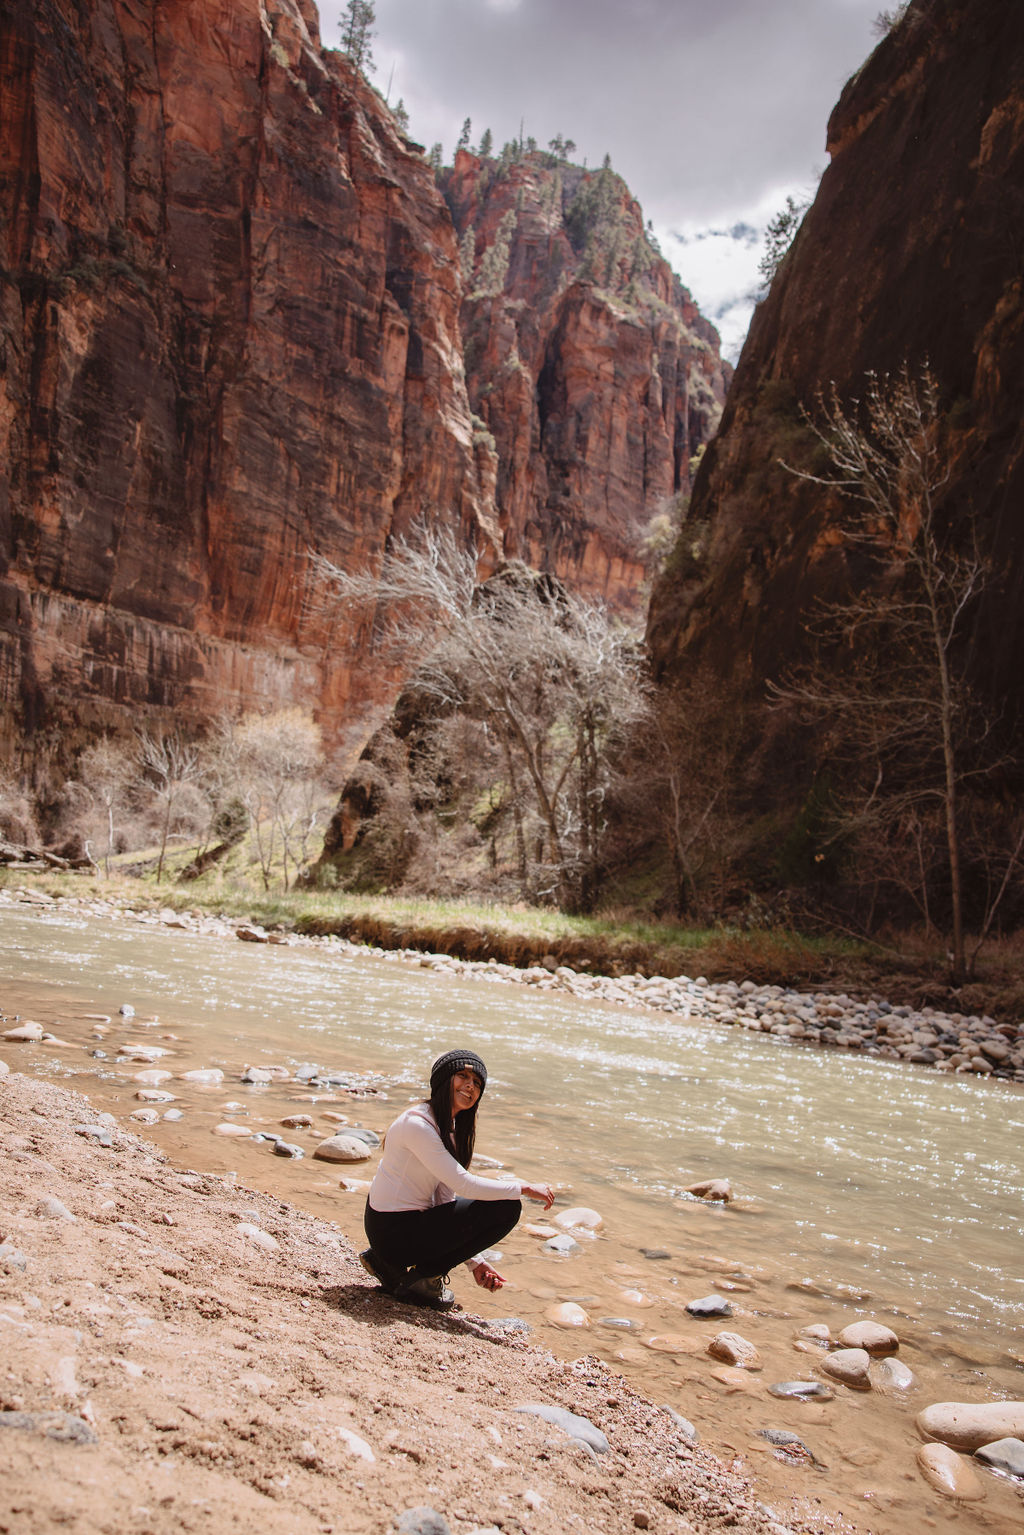 A person squats on a sandy riverbank, gazing at the camera, with a flowing river and tall, reddish cliff walls in the background at zion national park